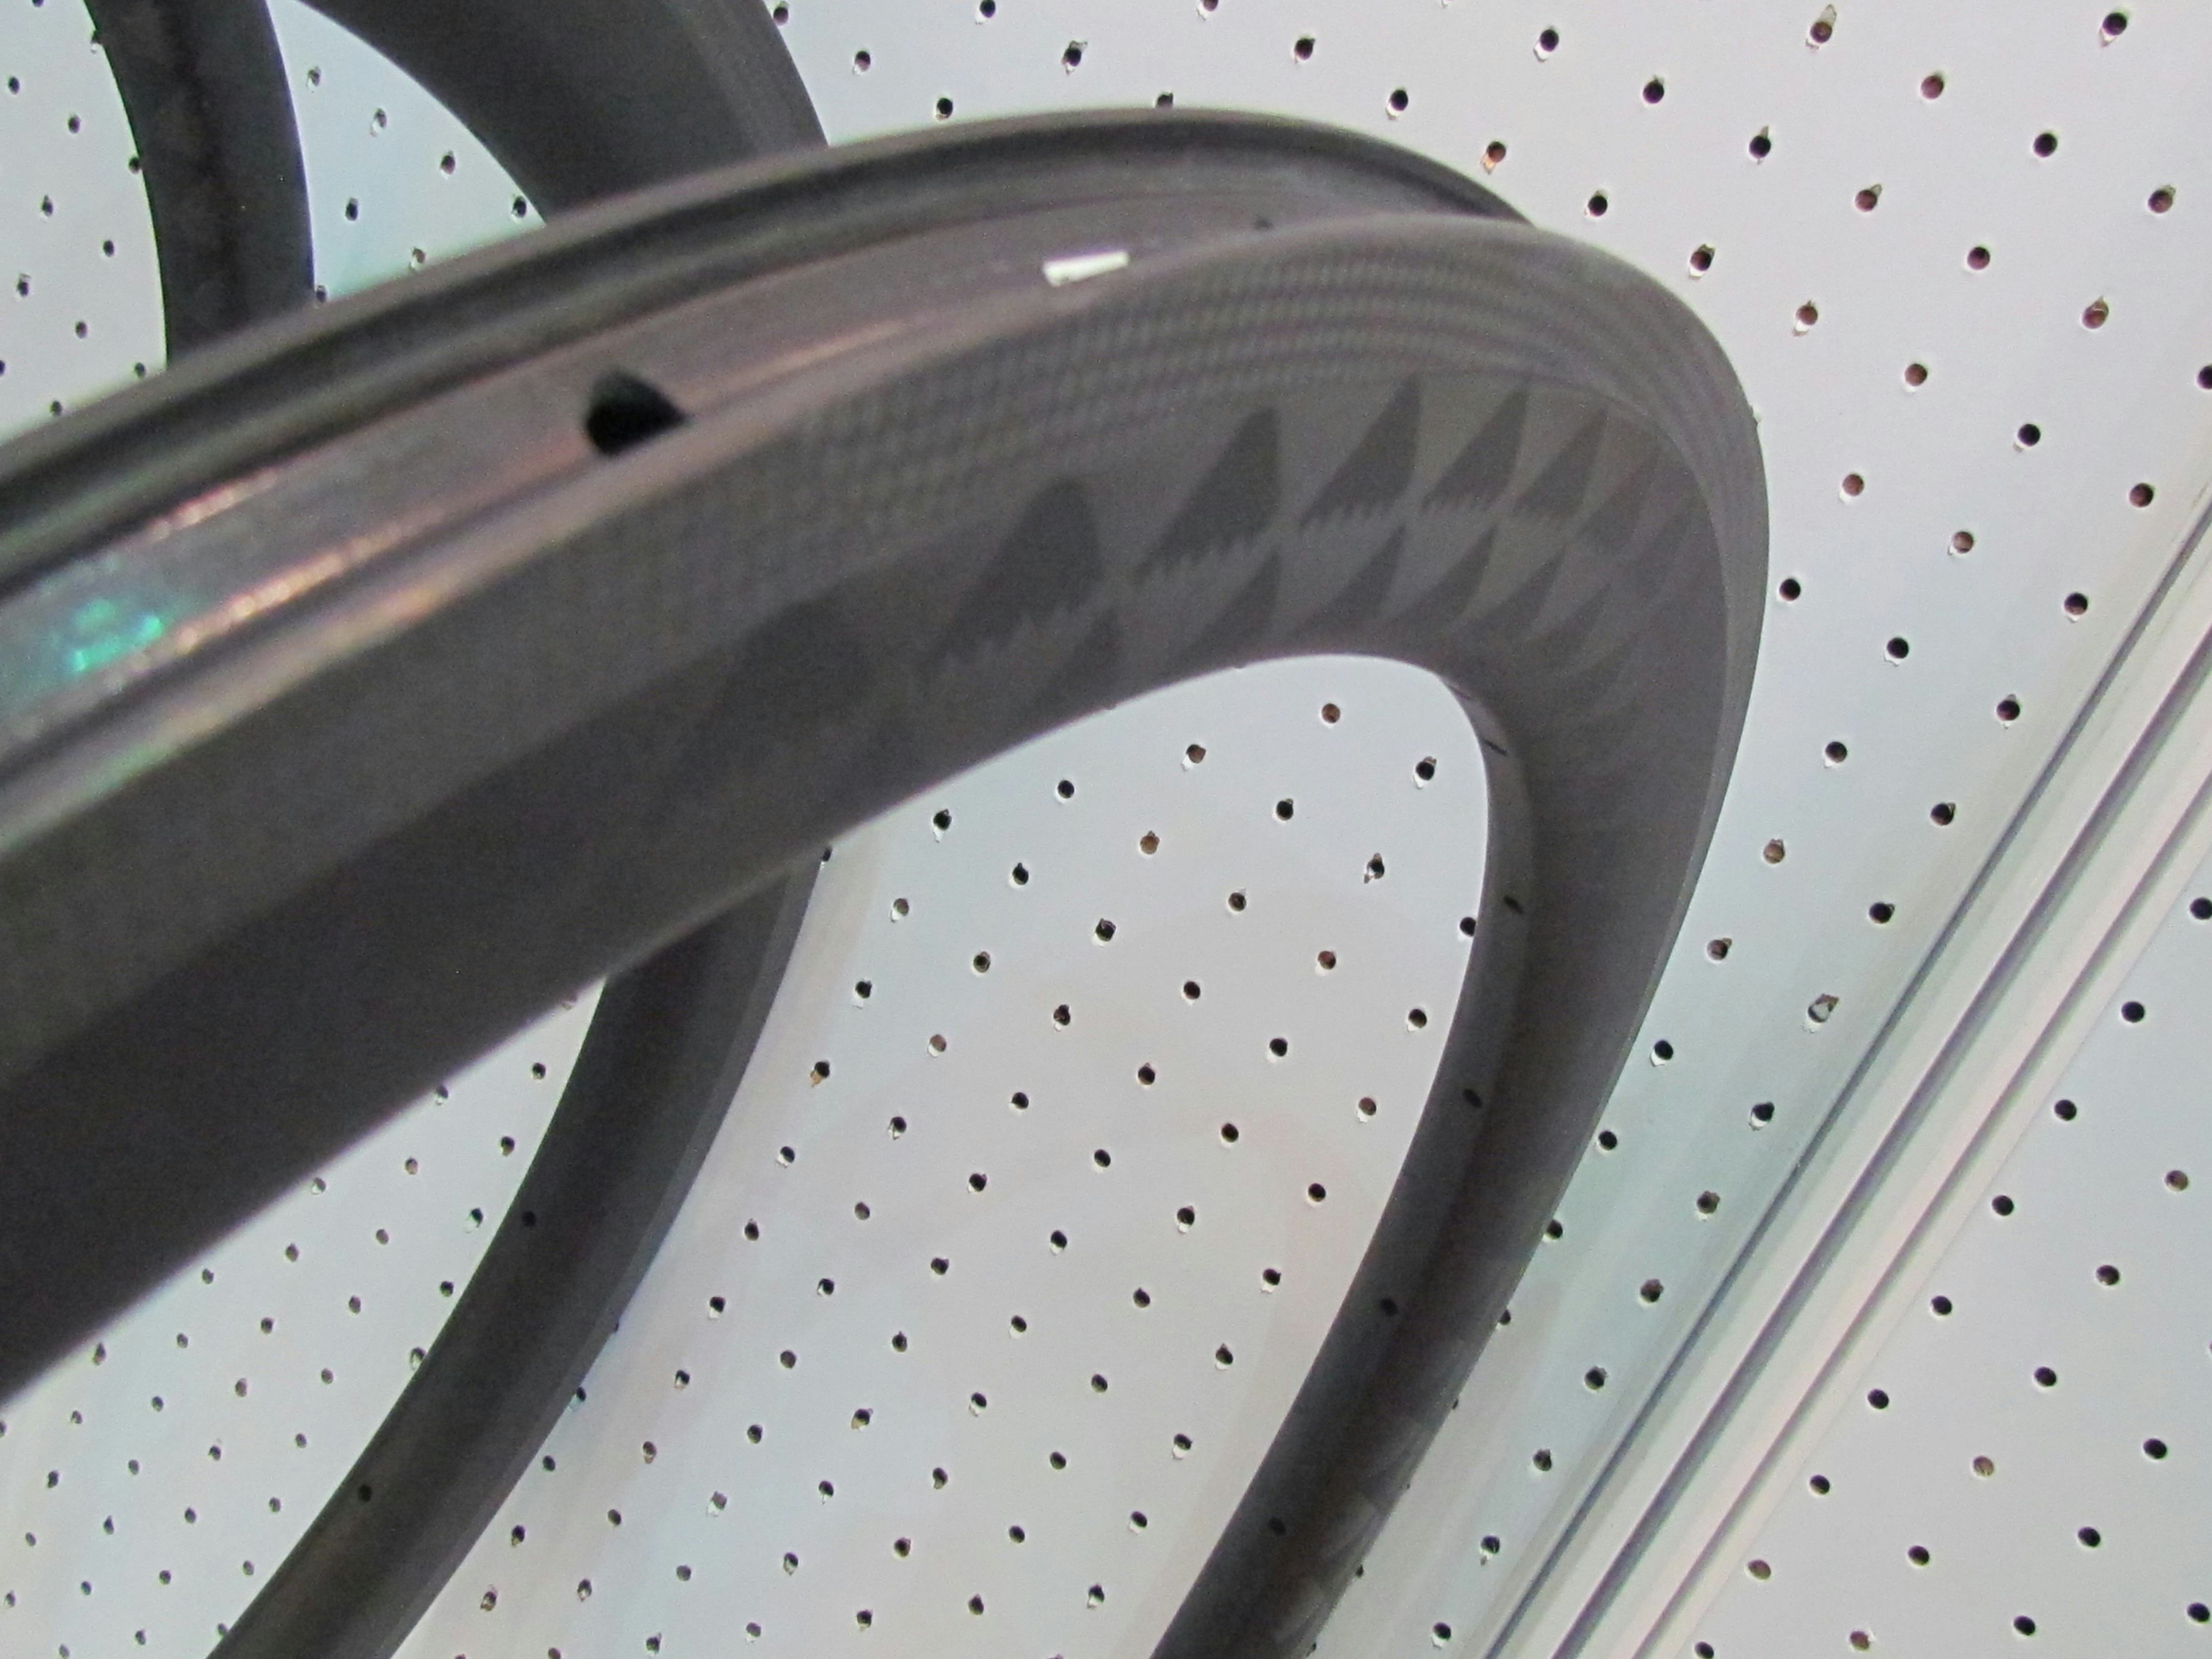 Production of carbon components in Europe is to start soon. In Taiwan Velocite runs automated carbon rim production. – Photo Bike Europe